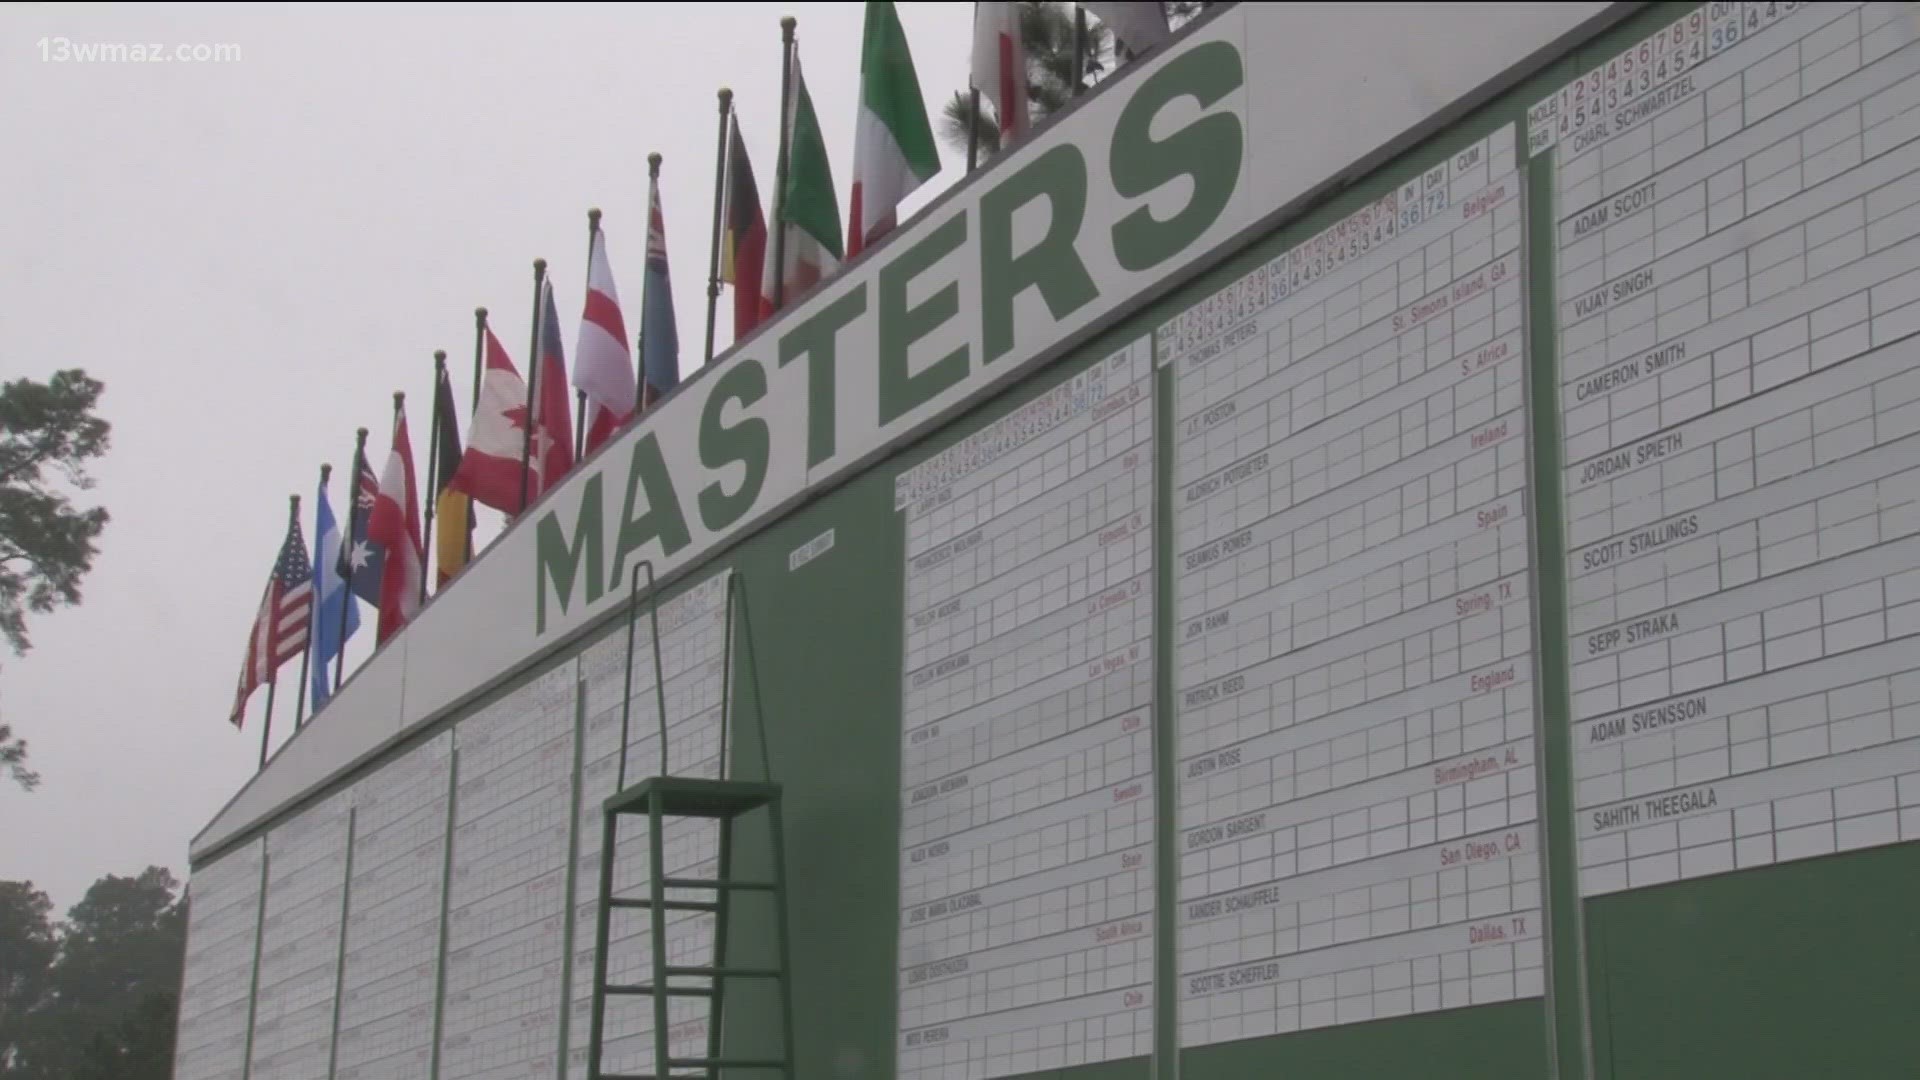 Marvin James talked to some Central Georgia patrons about what they like most about Augusta national and who they expect to see on top of the leader board.